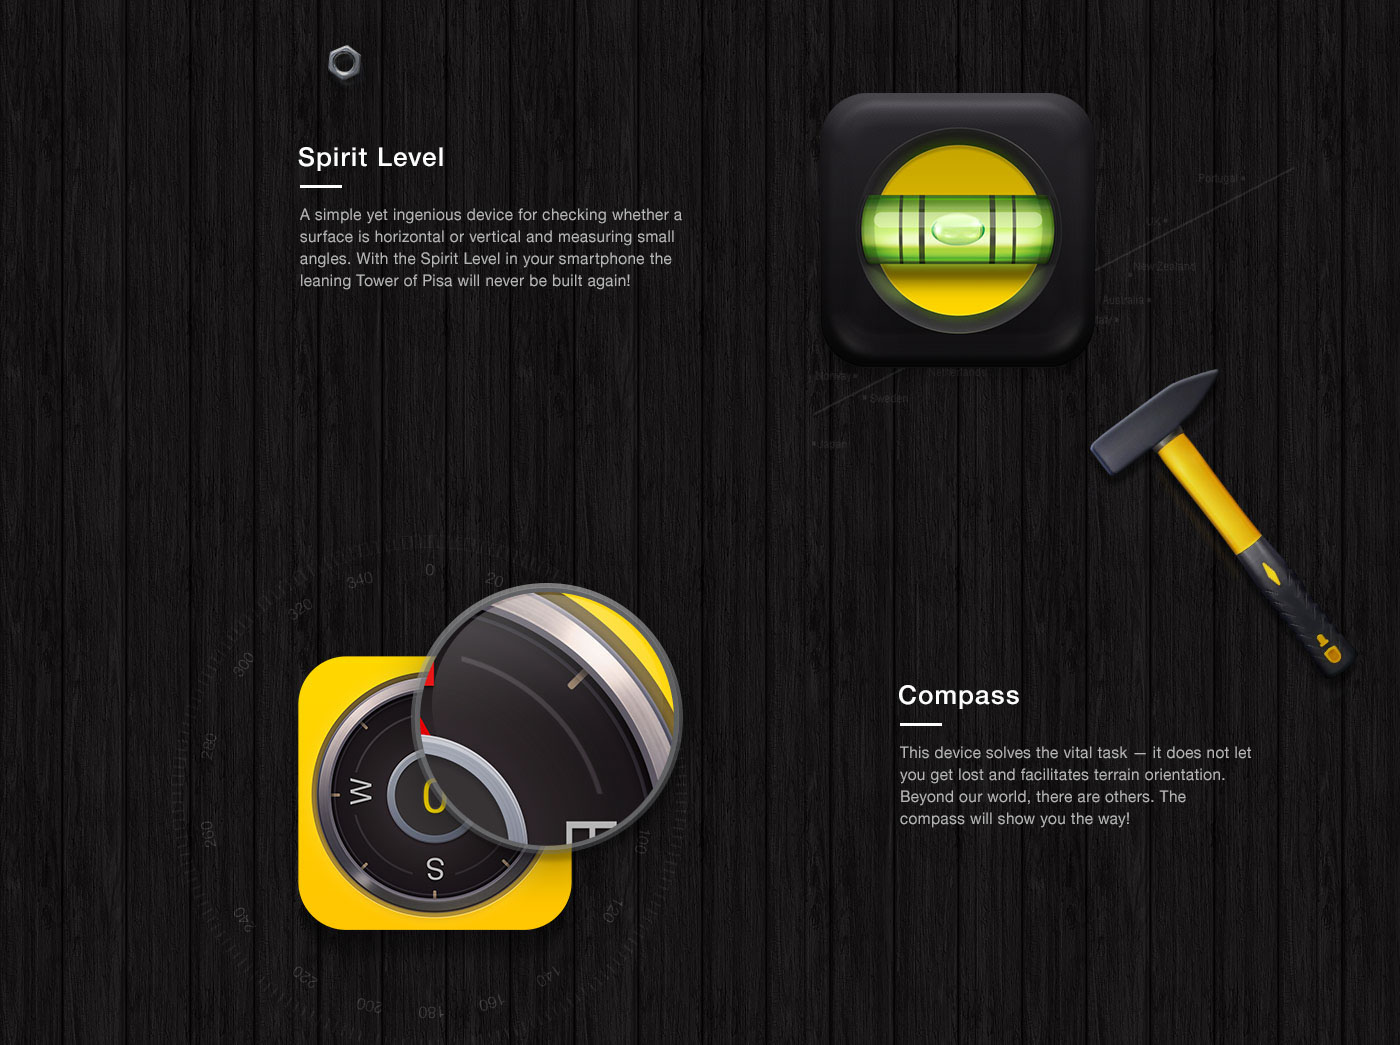 tools mobile ios android app Interface flahlight ruler compass halo lab